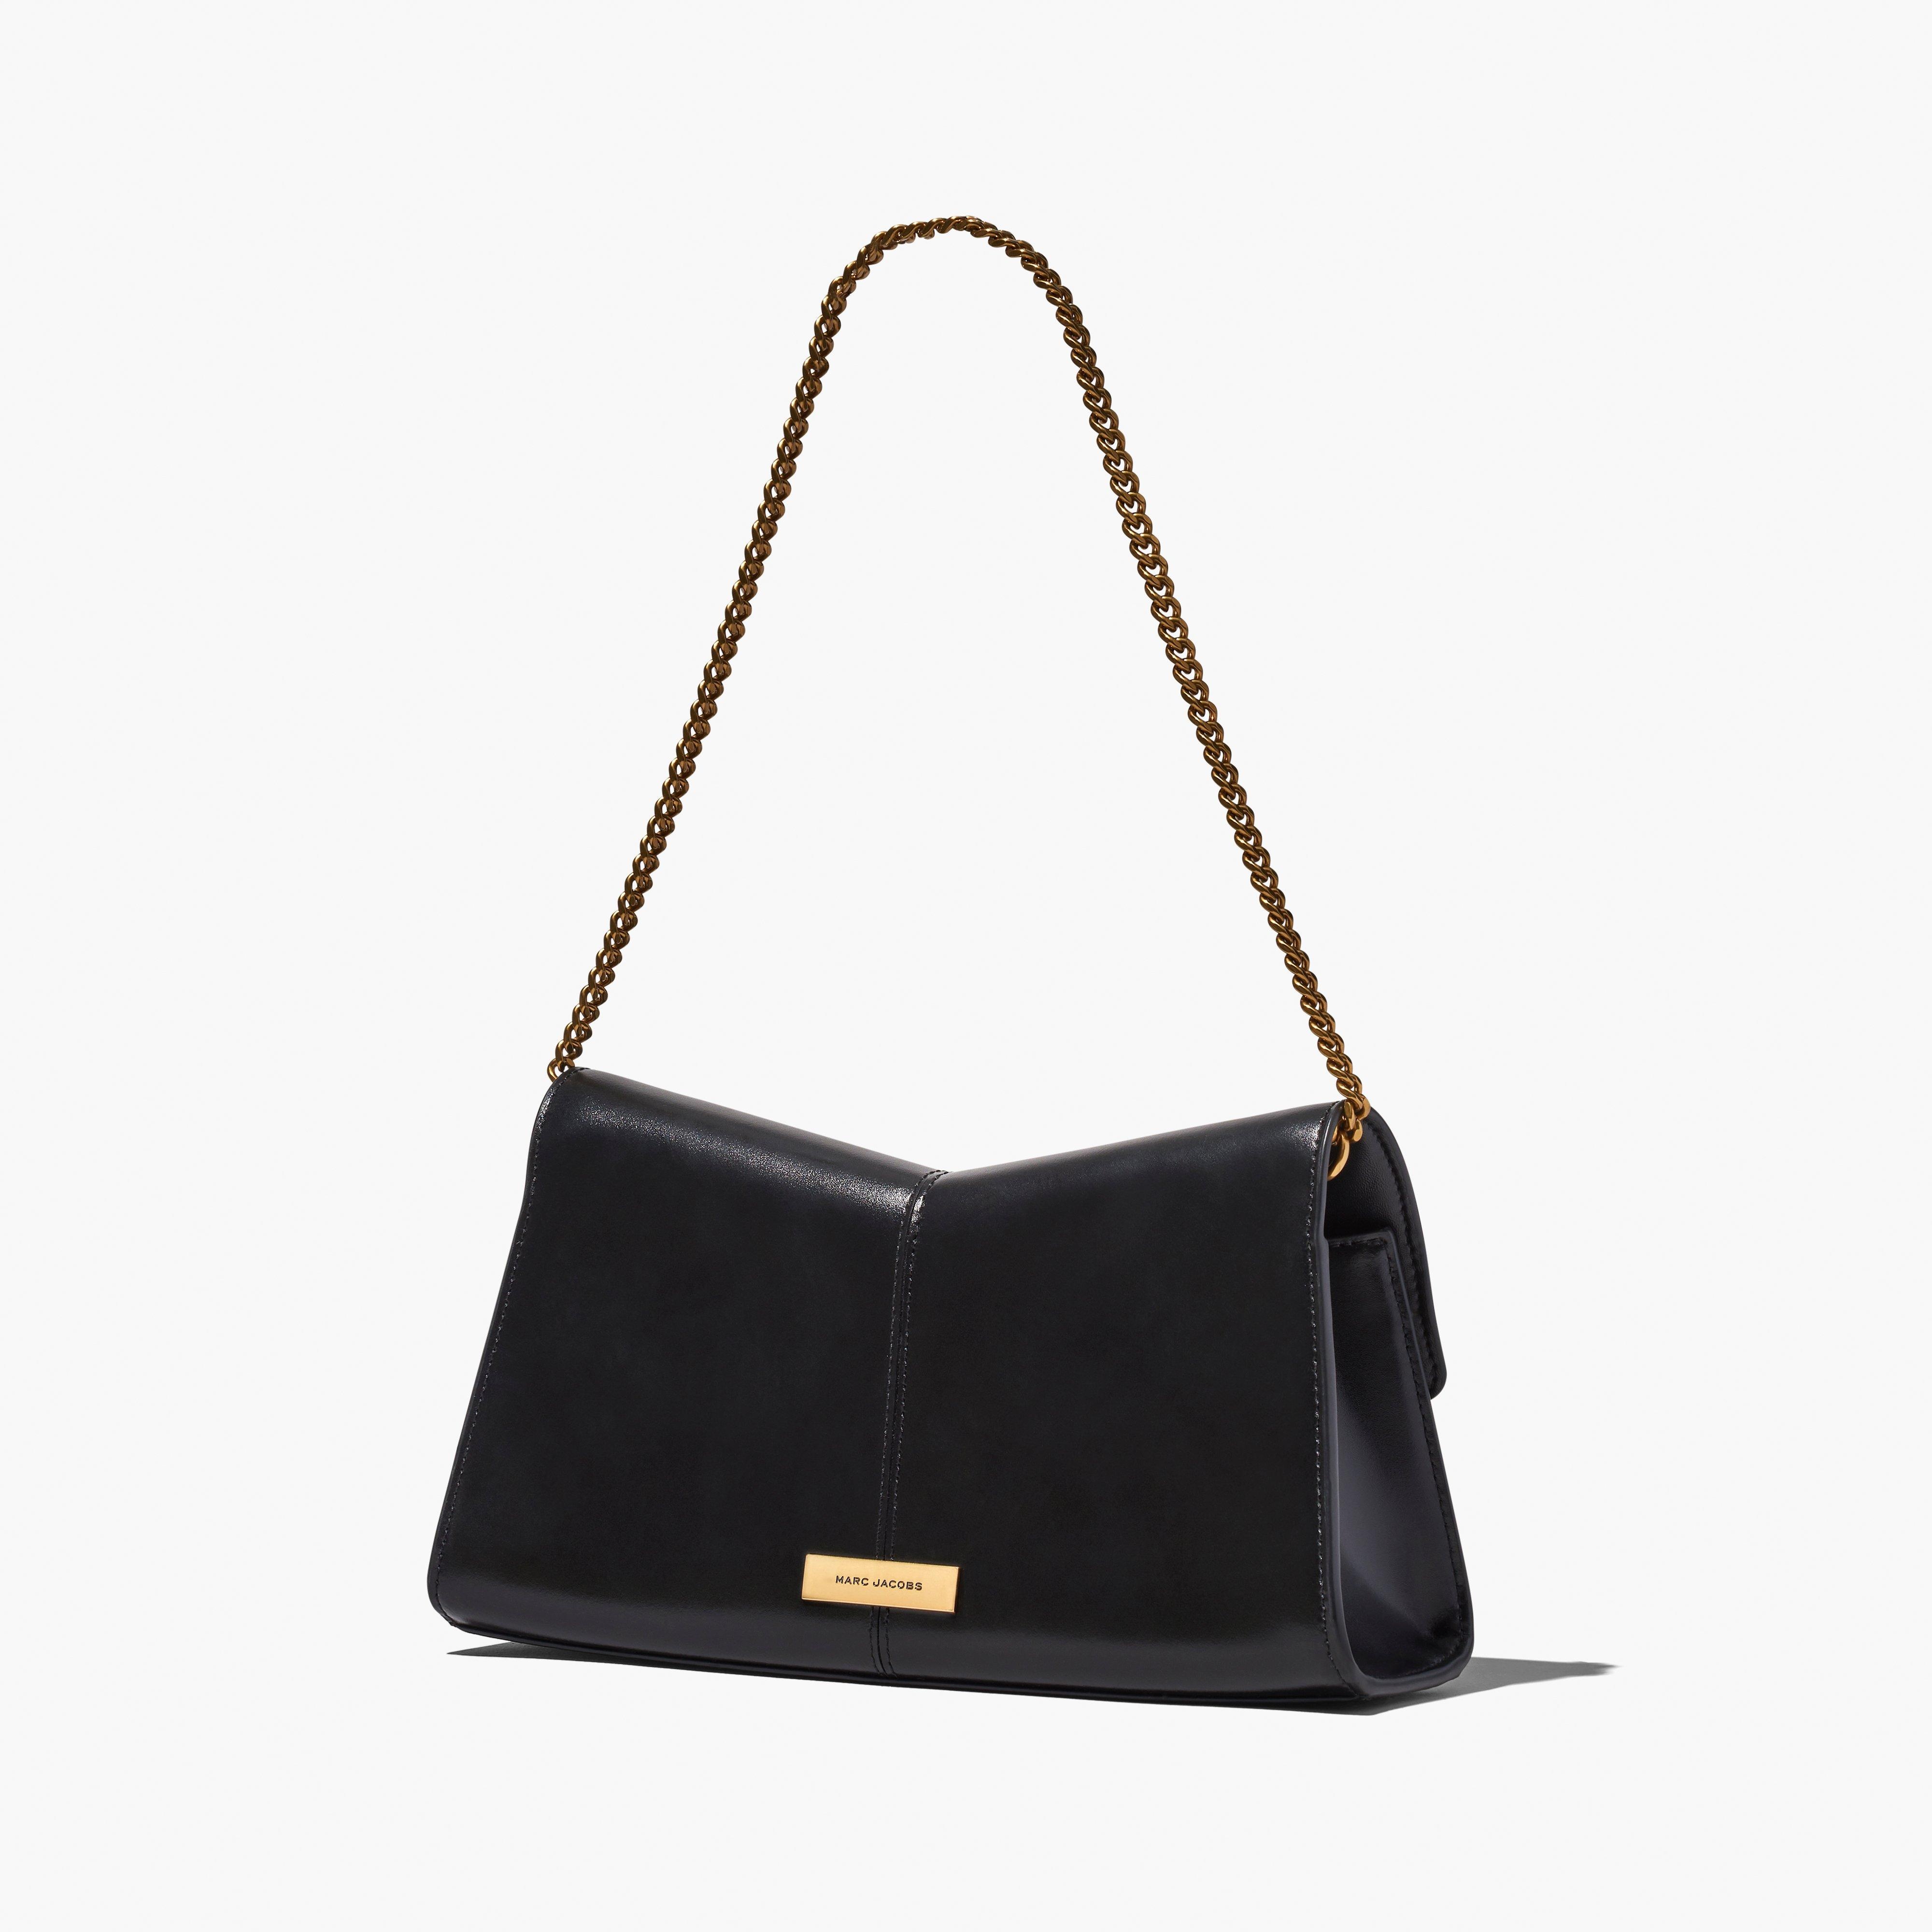 THE ST. MARC CONVERTIBLE CLUTCH - 3